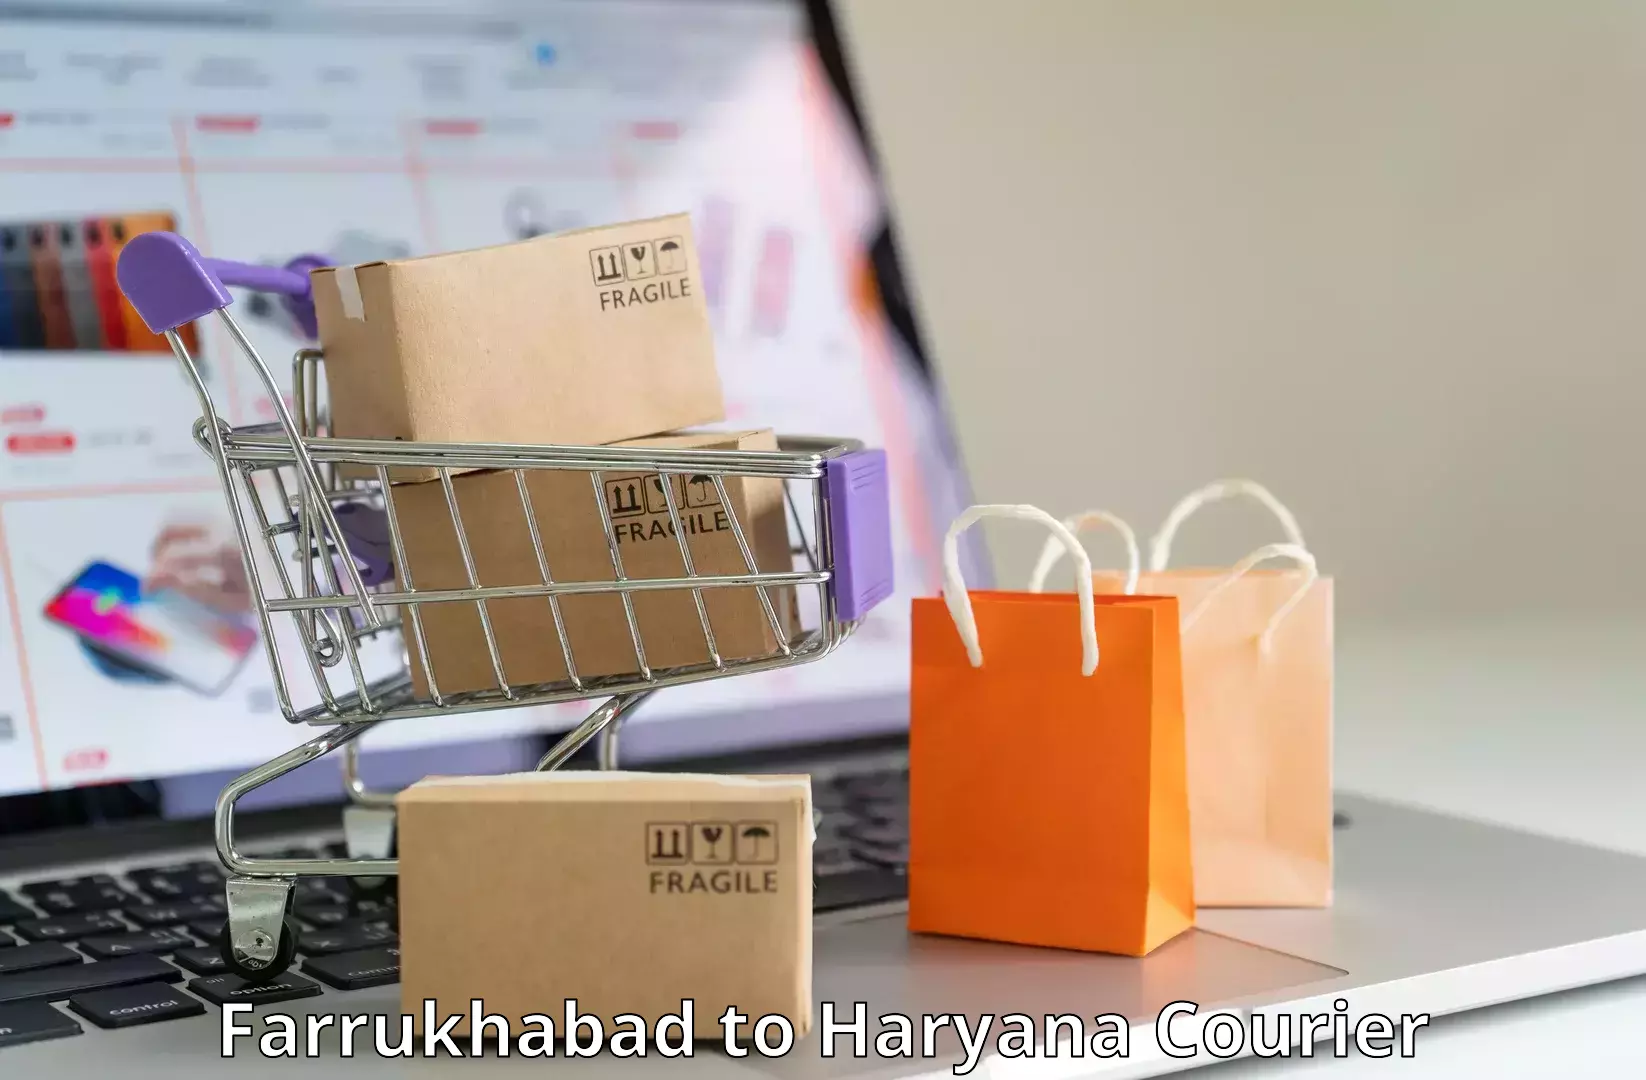 Same-day delivery options Farrukhabad to Chaudhary Charan Singh Haryana Agricultural University Hisar